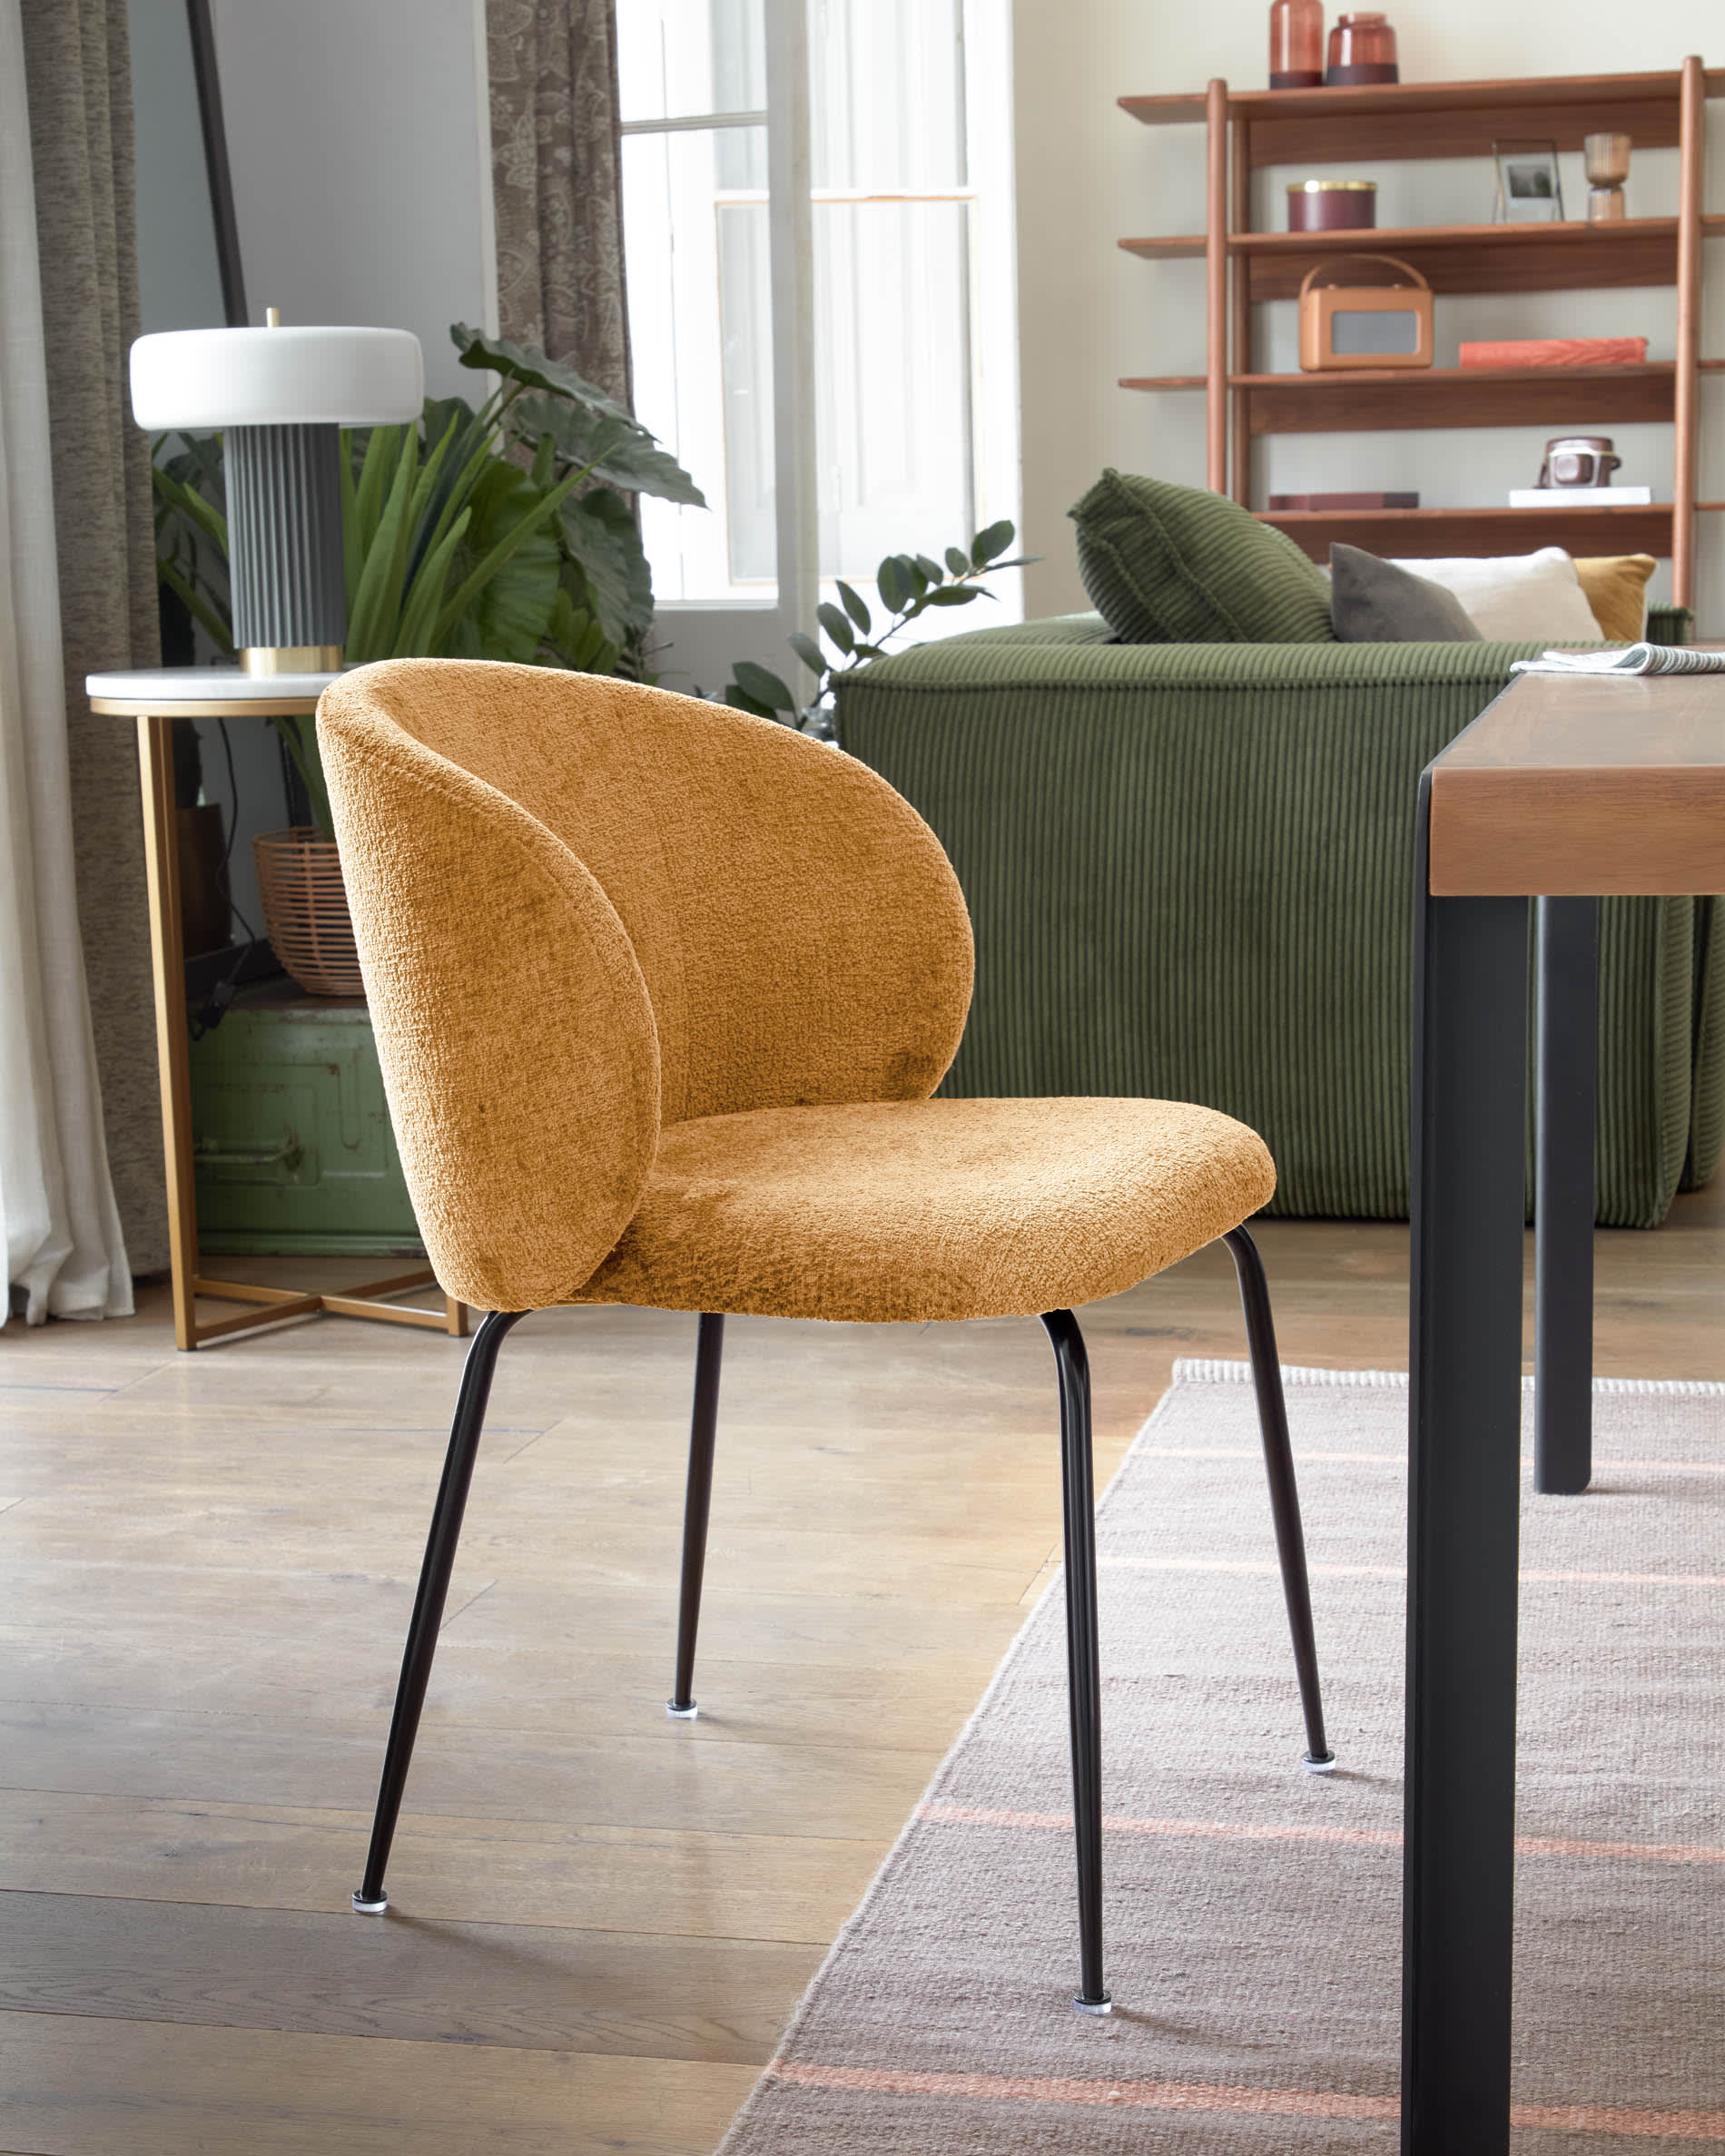 Mustard chenille Minna chair with steel legs with black finish